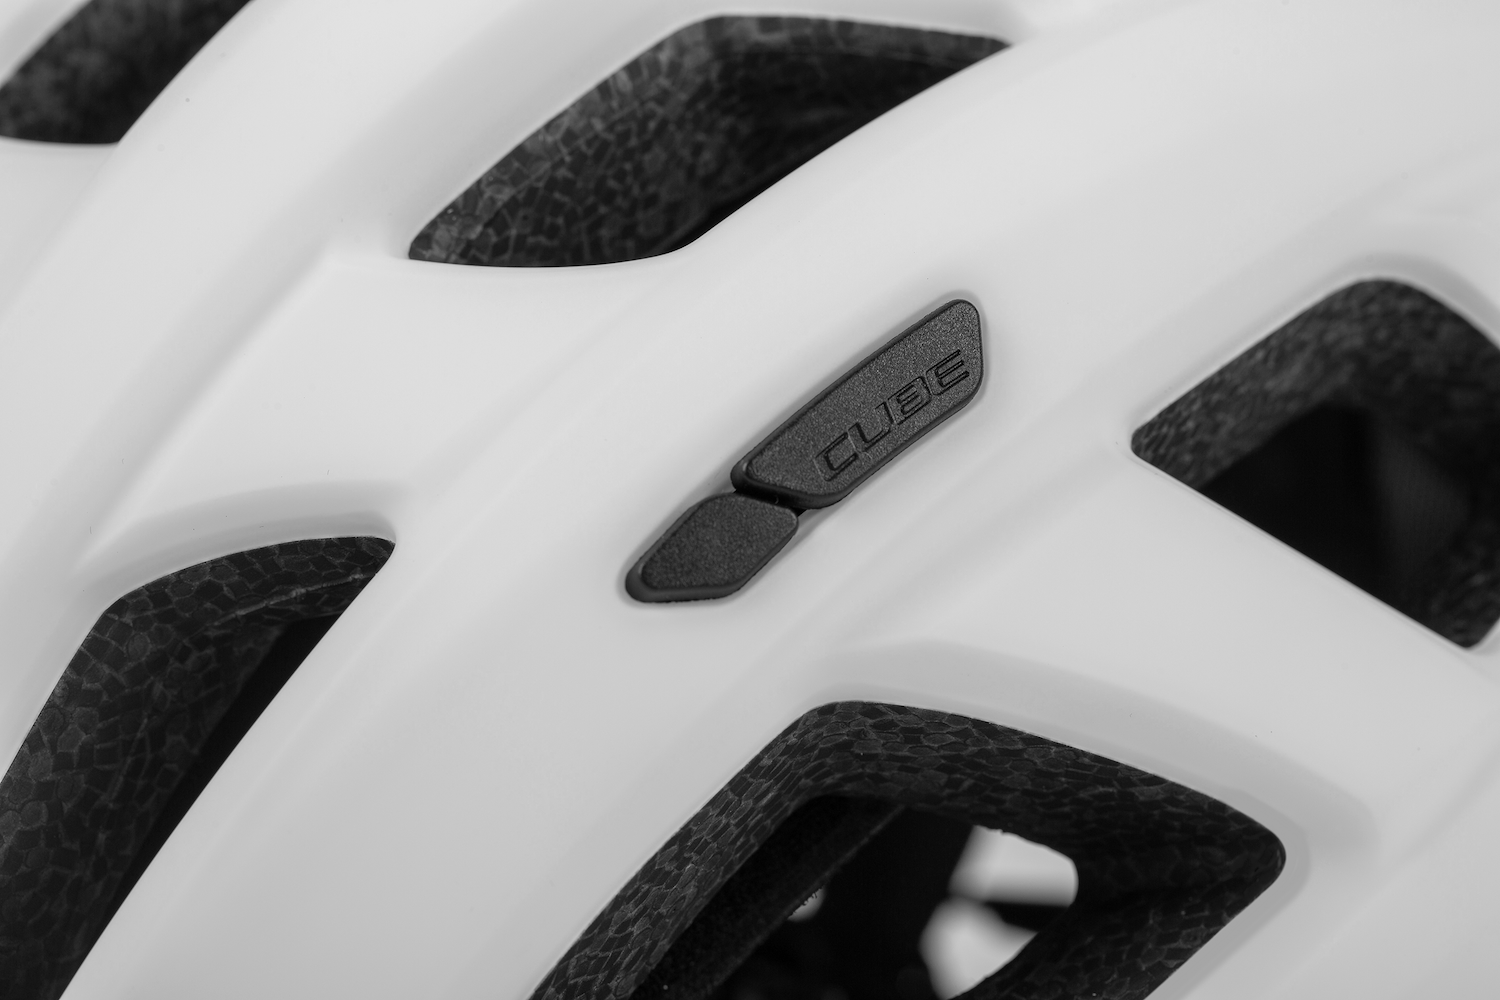 CUBE Helm ROAD RACE (white)